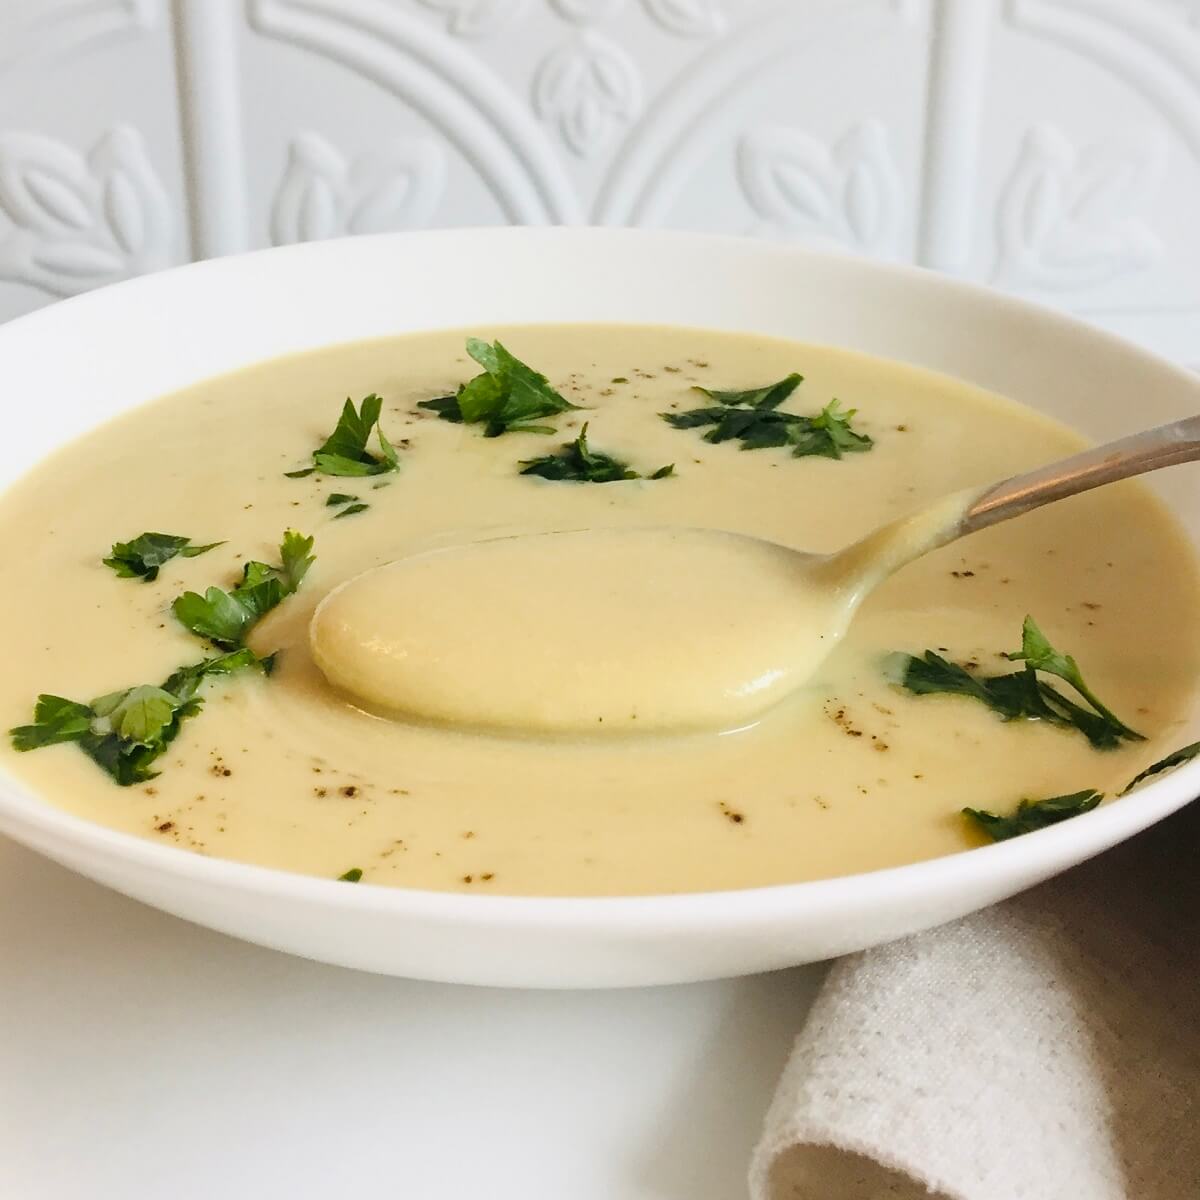 A bowl of vegan cream of cauliflower soup with parsley sprinkled on top.